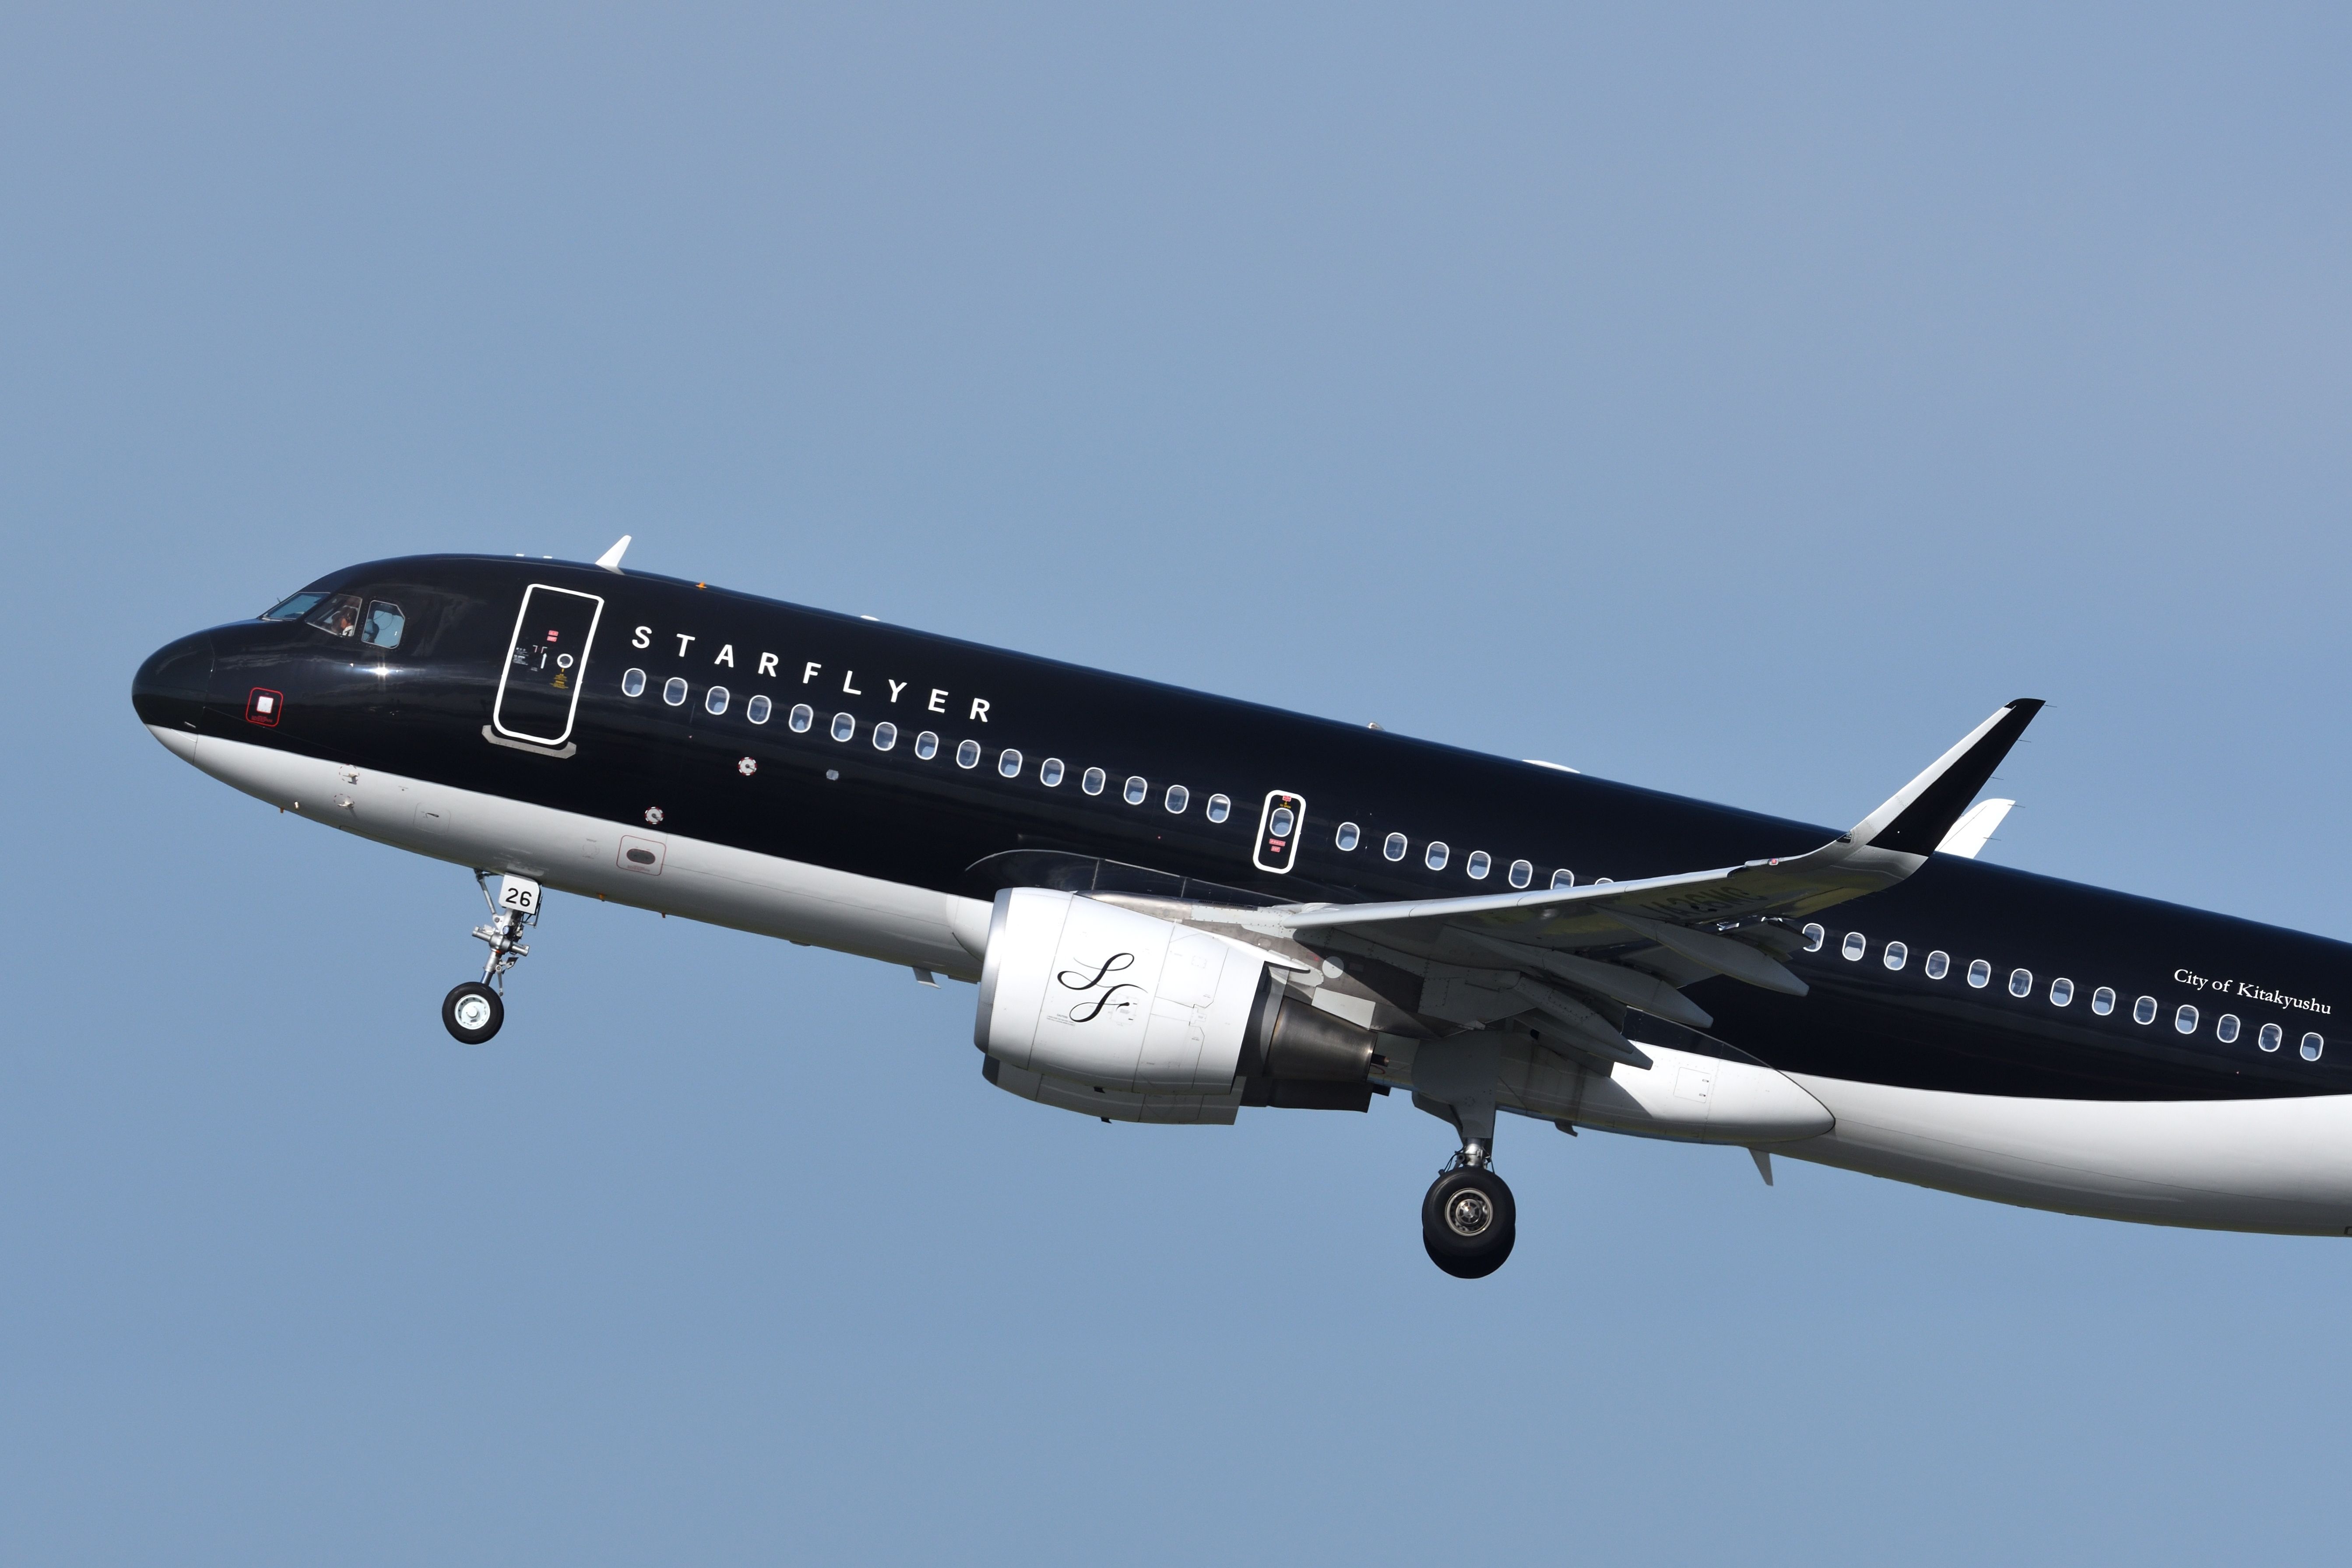 Starflyer Airbus A320 taking off